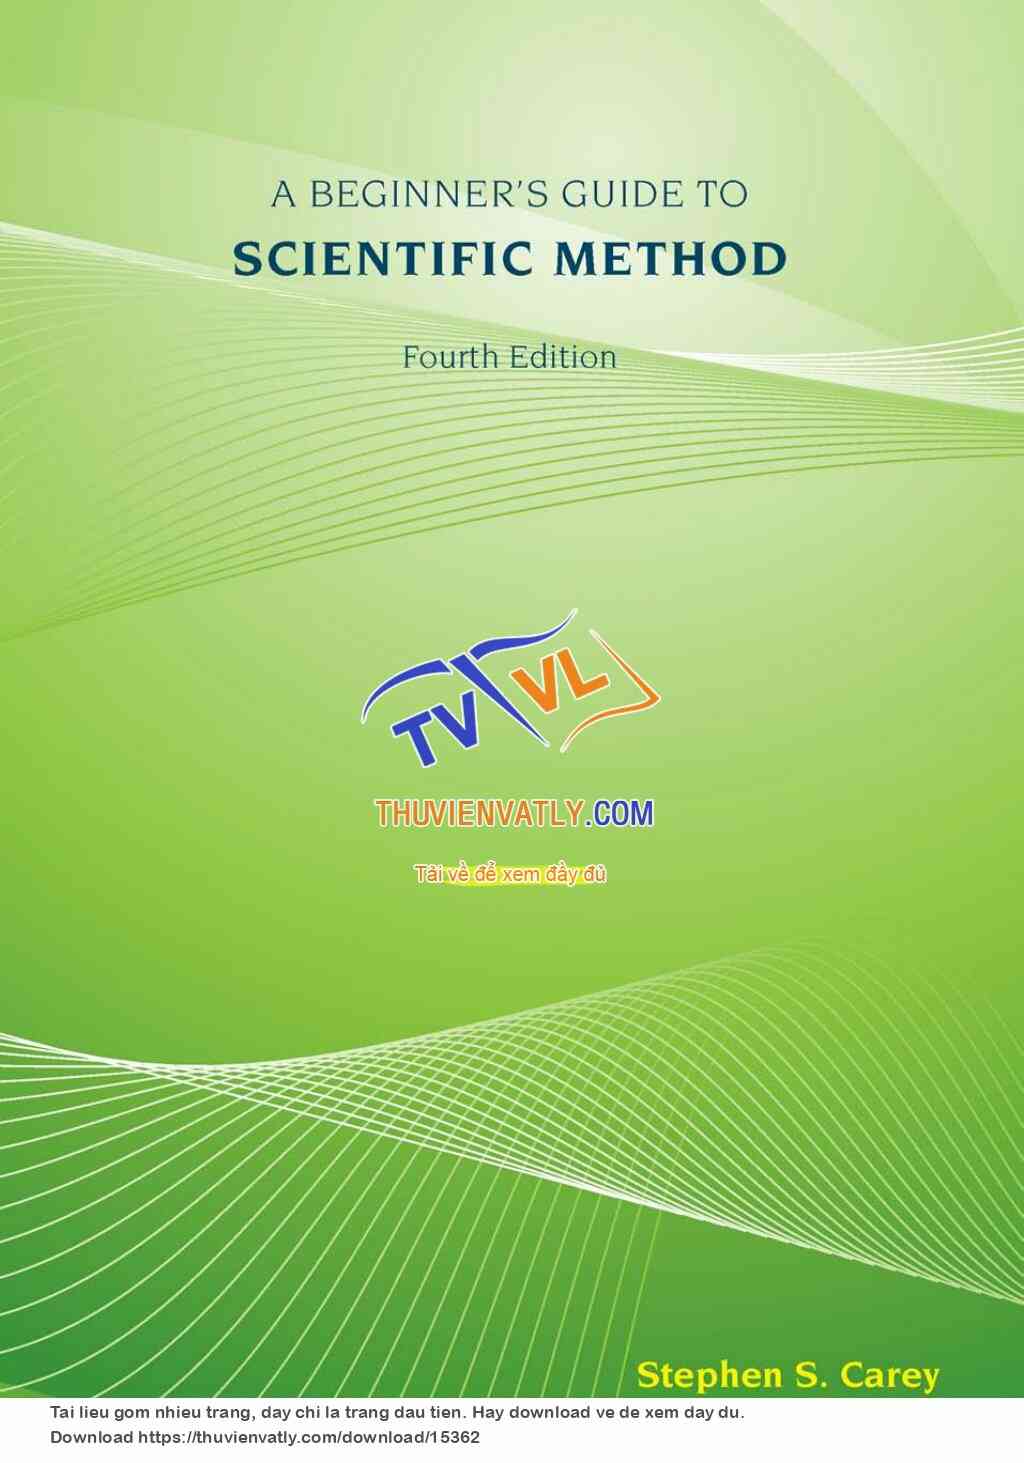 A Beginner's Guide to Scientific Method 4th ed. - S. Carey (Cengage, 2011)